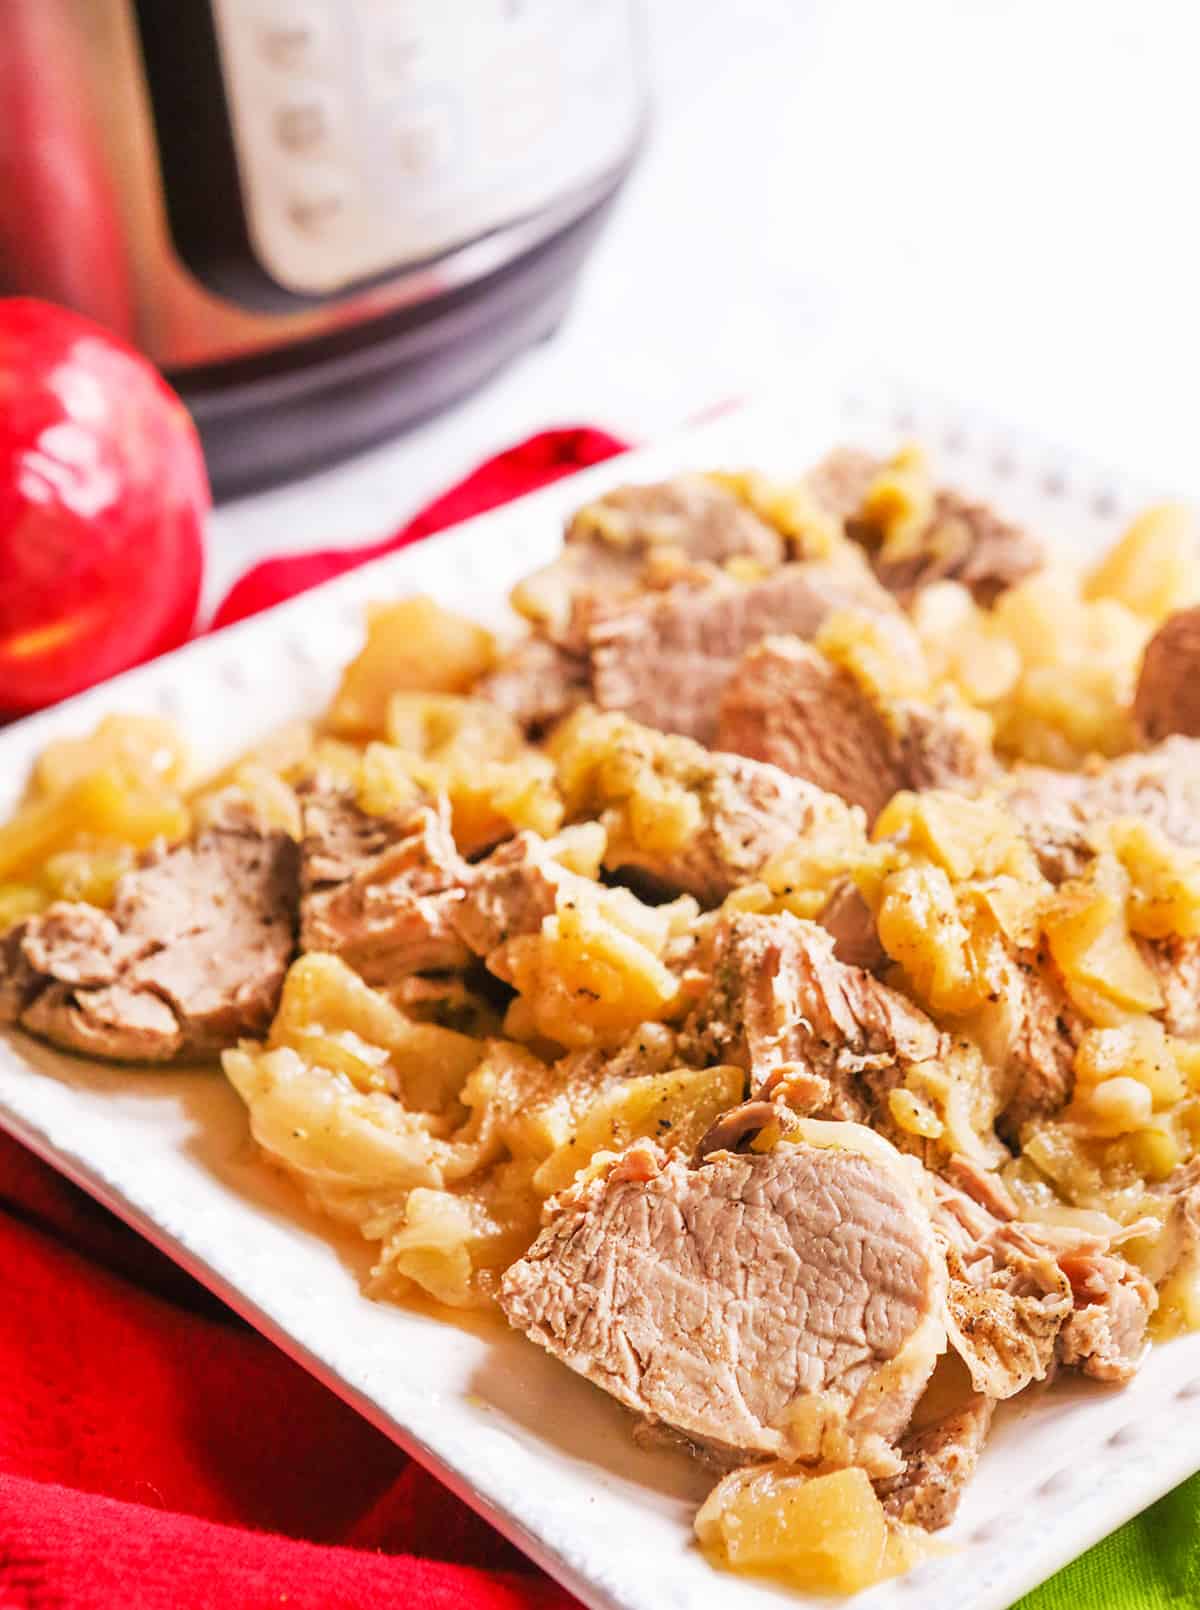 Serving platter with INSTANT POT pork and apples sitting by Instant Pot.